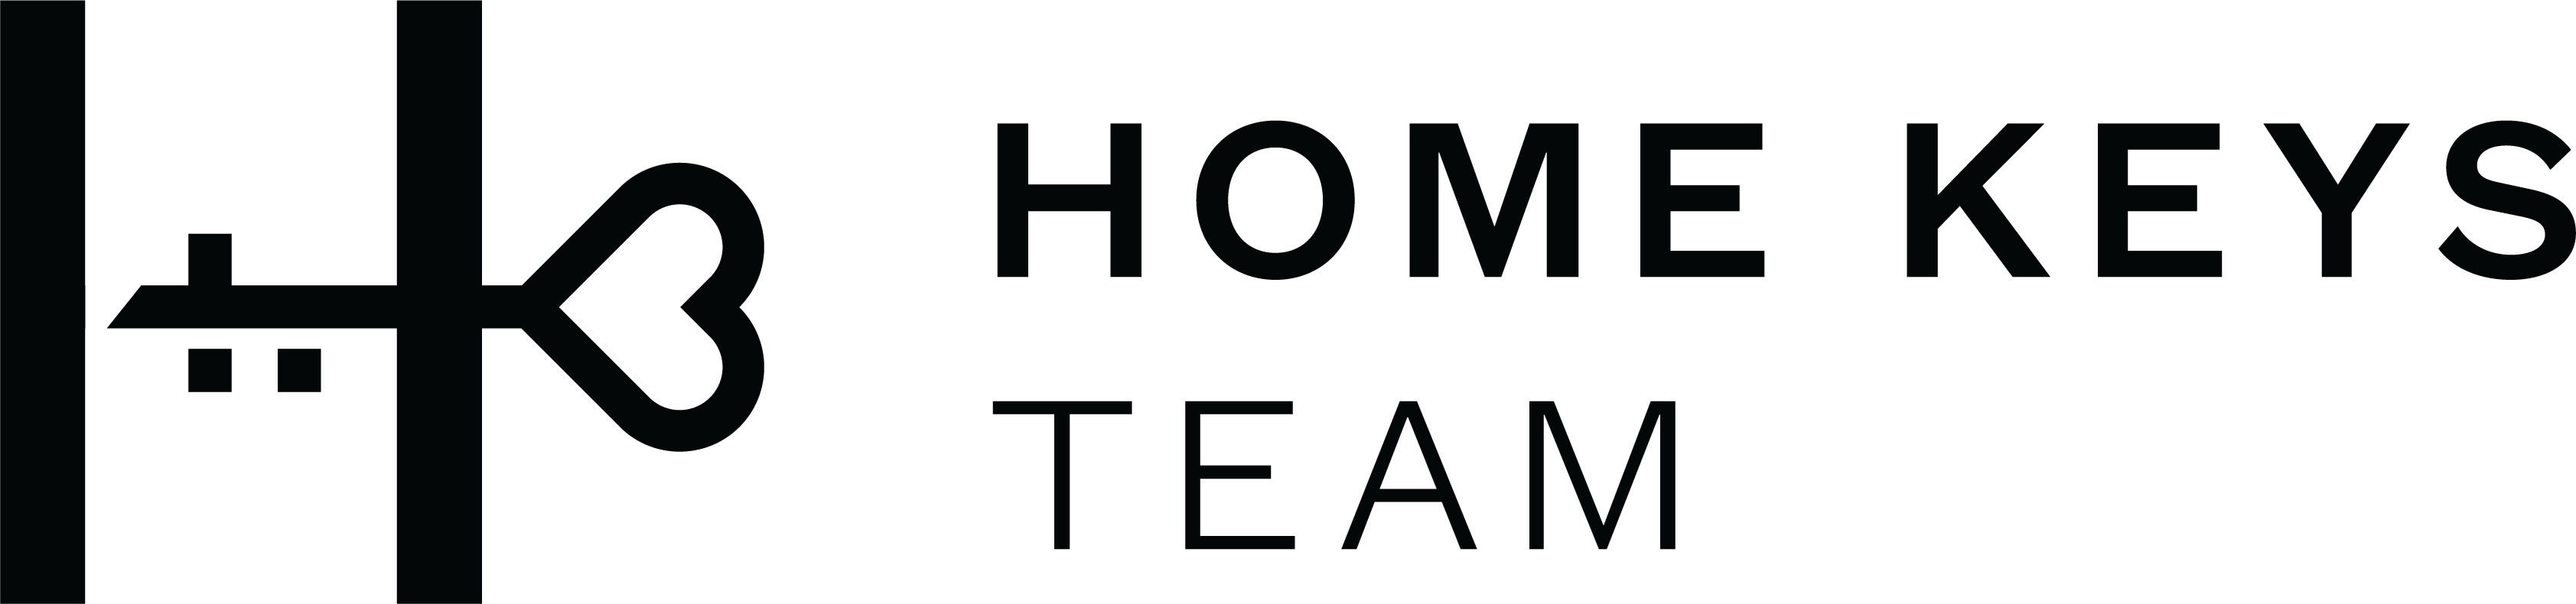 A text banner belonging to the Home Keys team